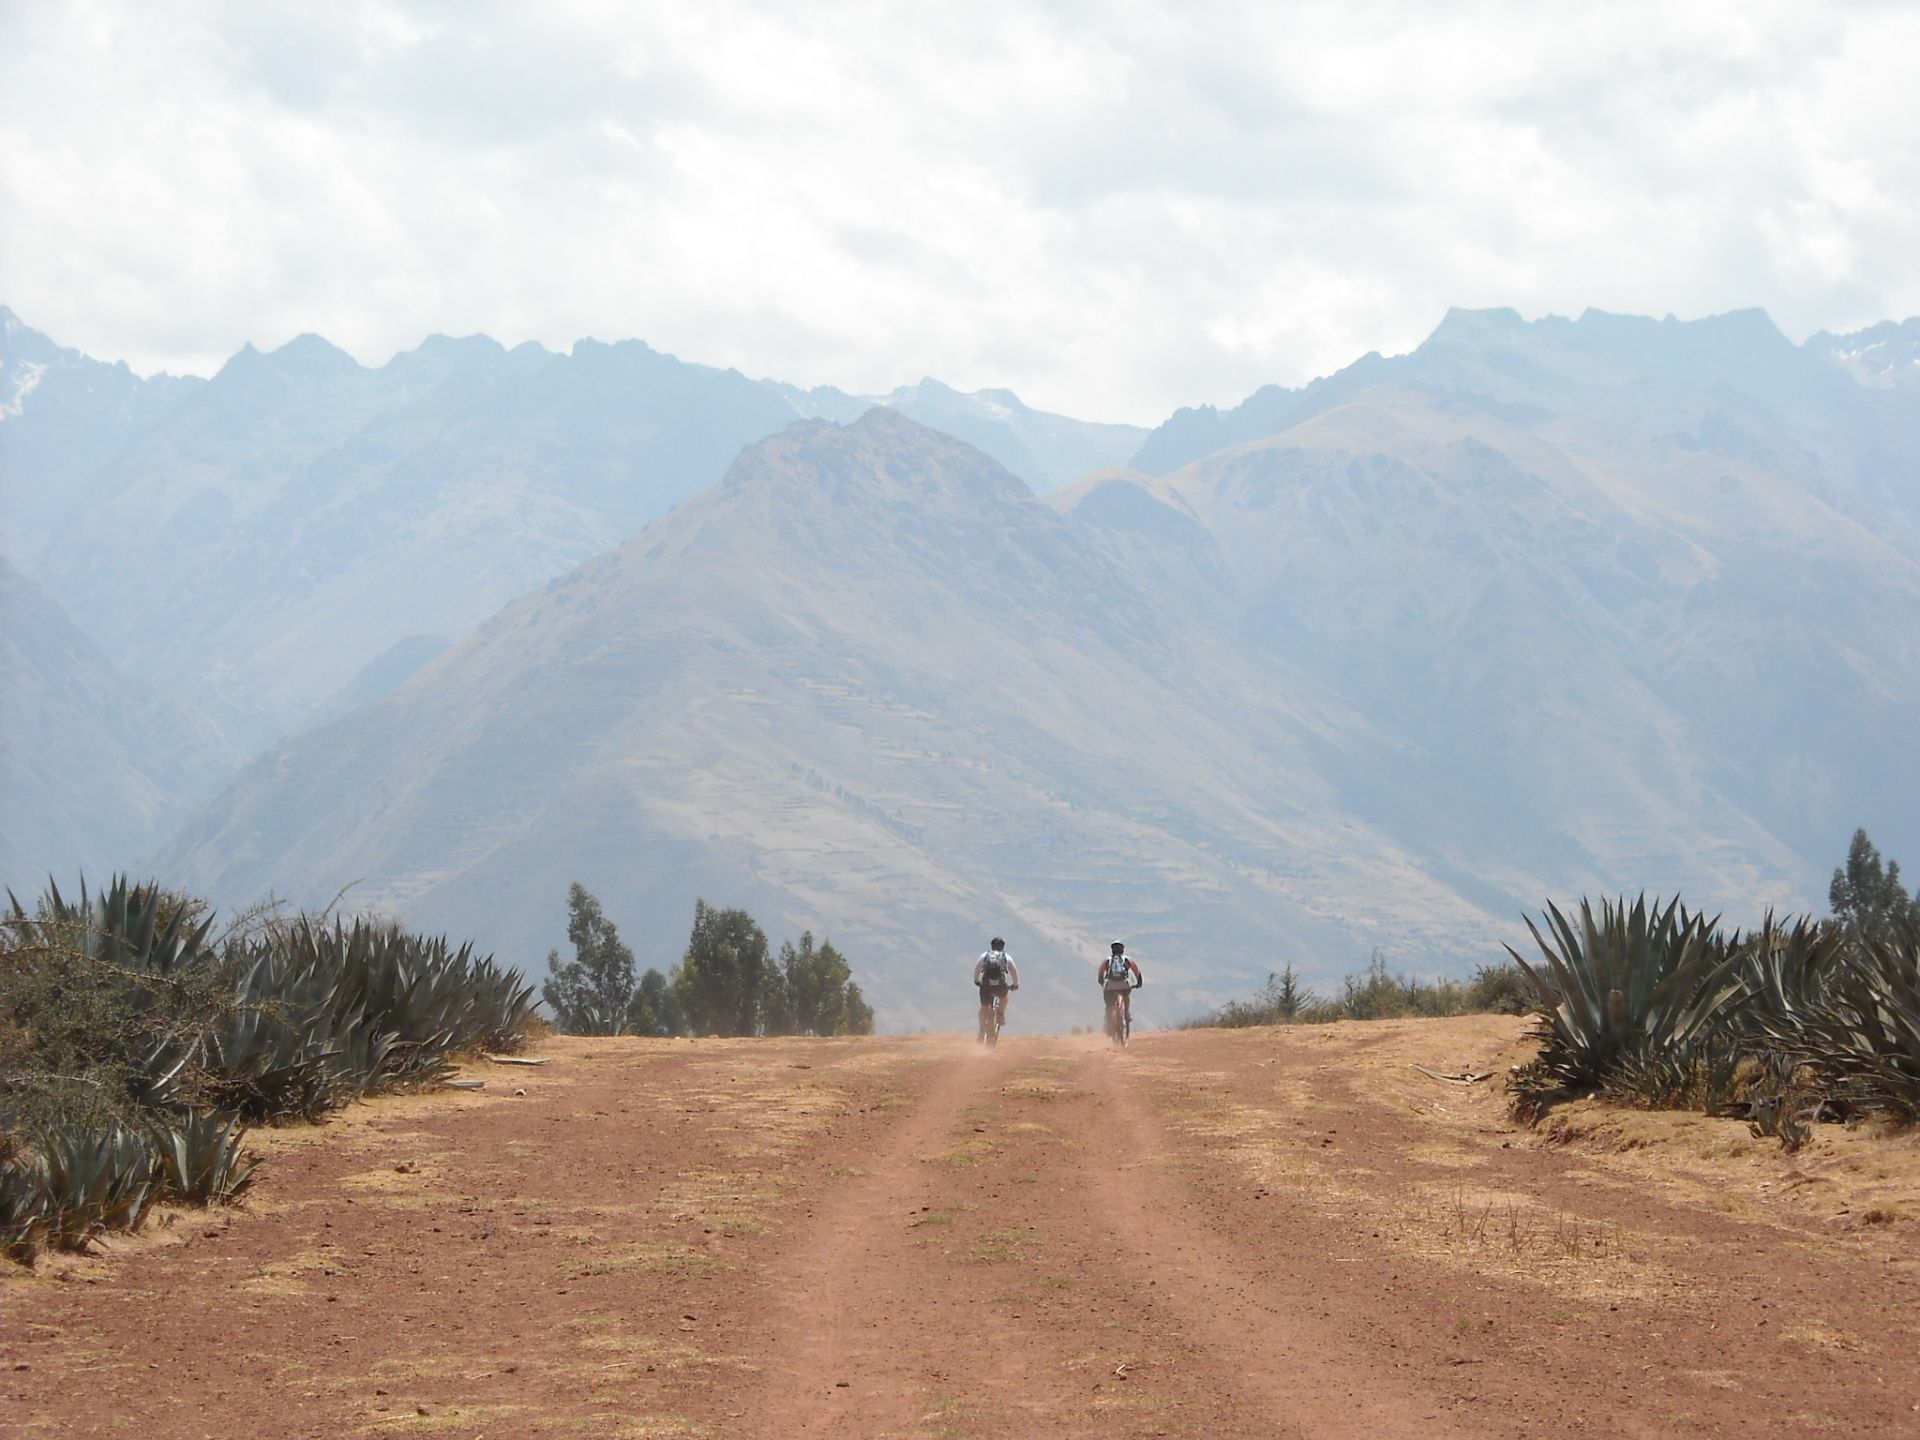 Ian's group will ride off the edge of the Andes into this incredible Peru trip itinerary